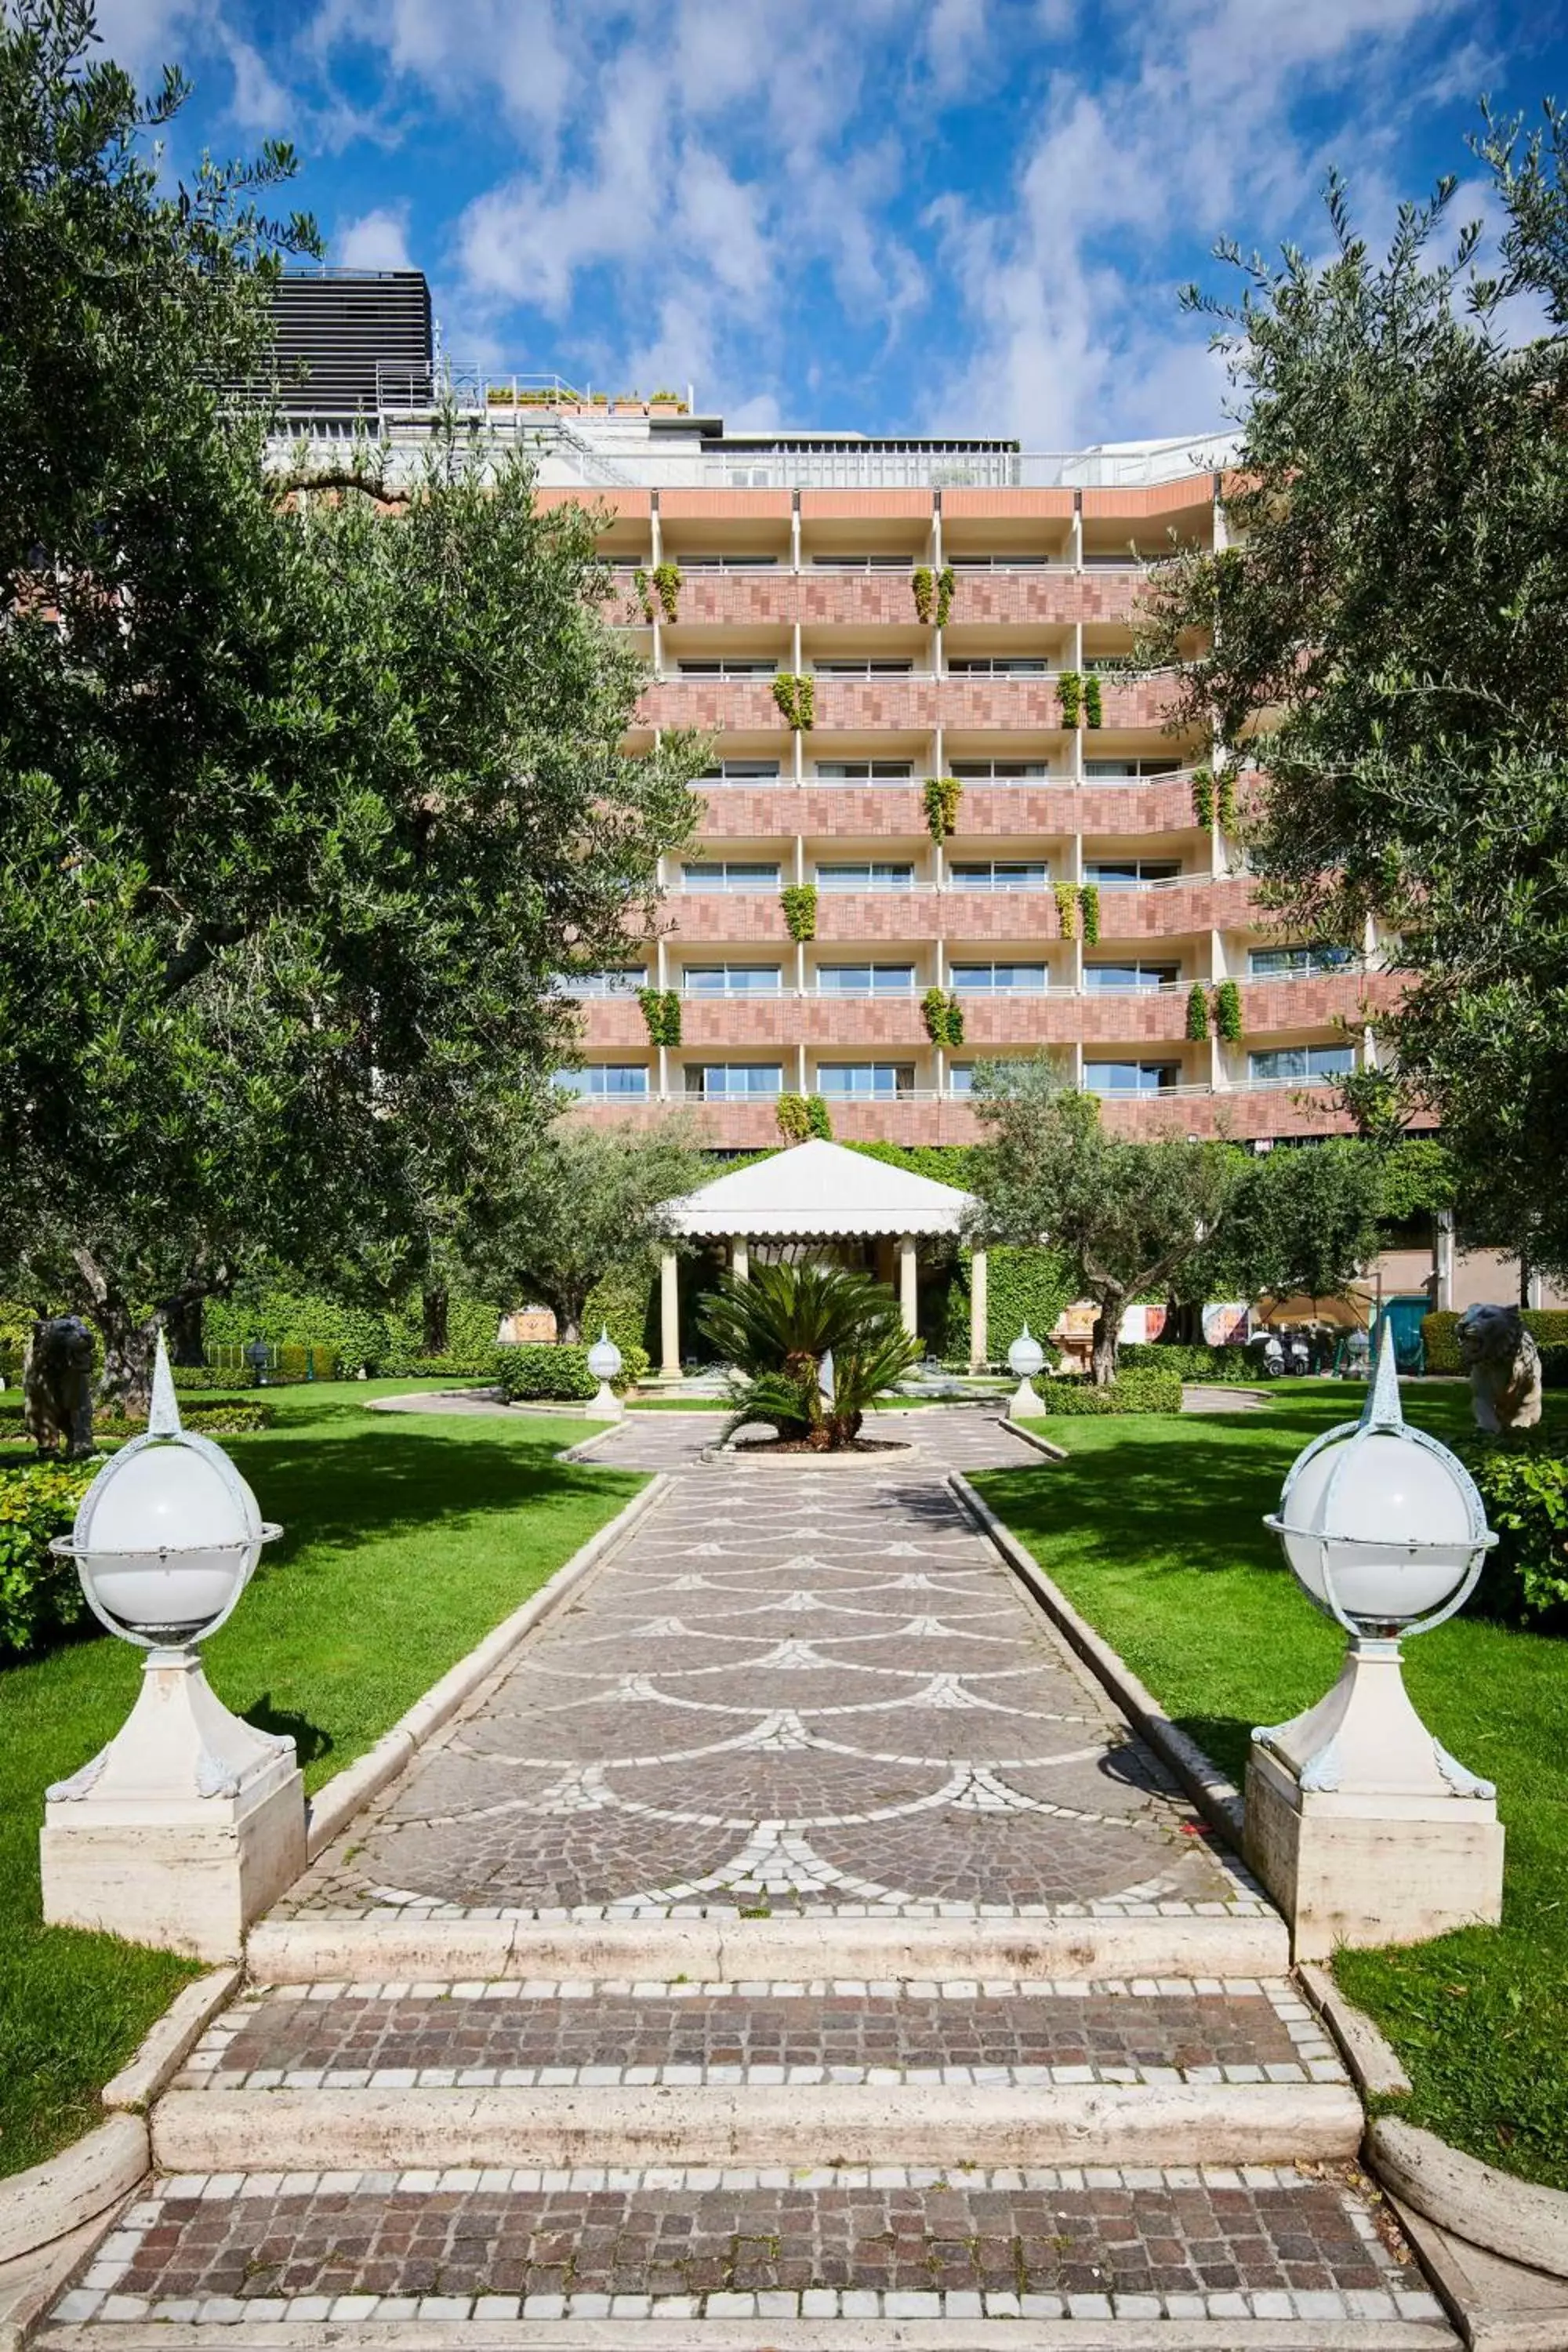 Inner courtyard view, Property Building in Rome Cavalieri, A Waldorf Astoria Hotel